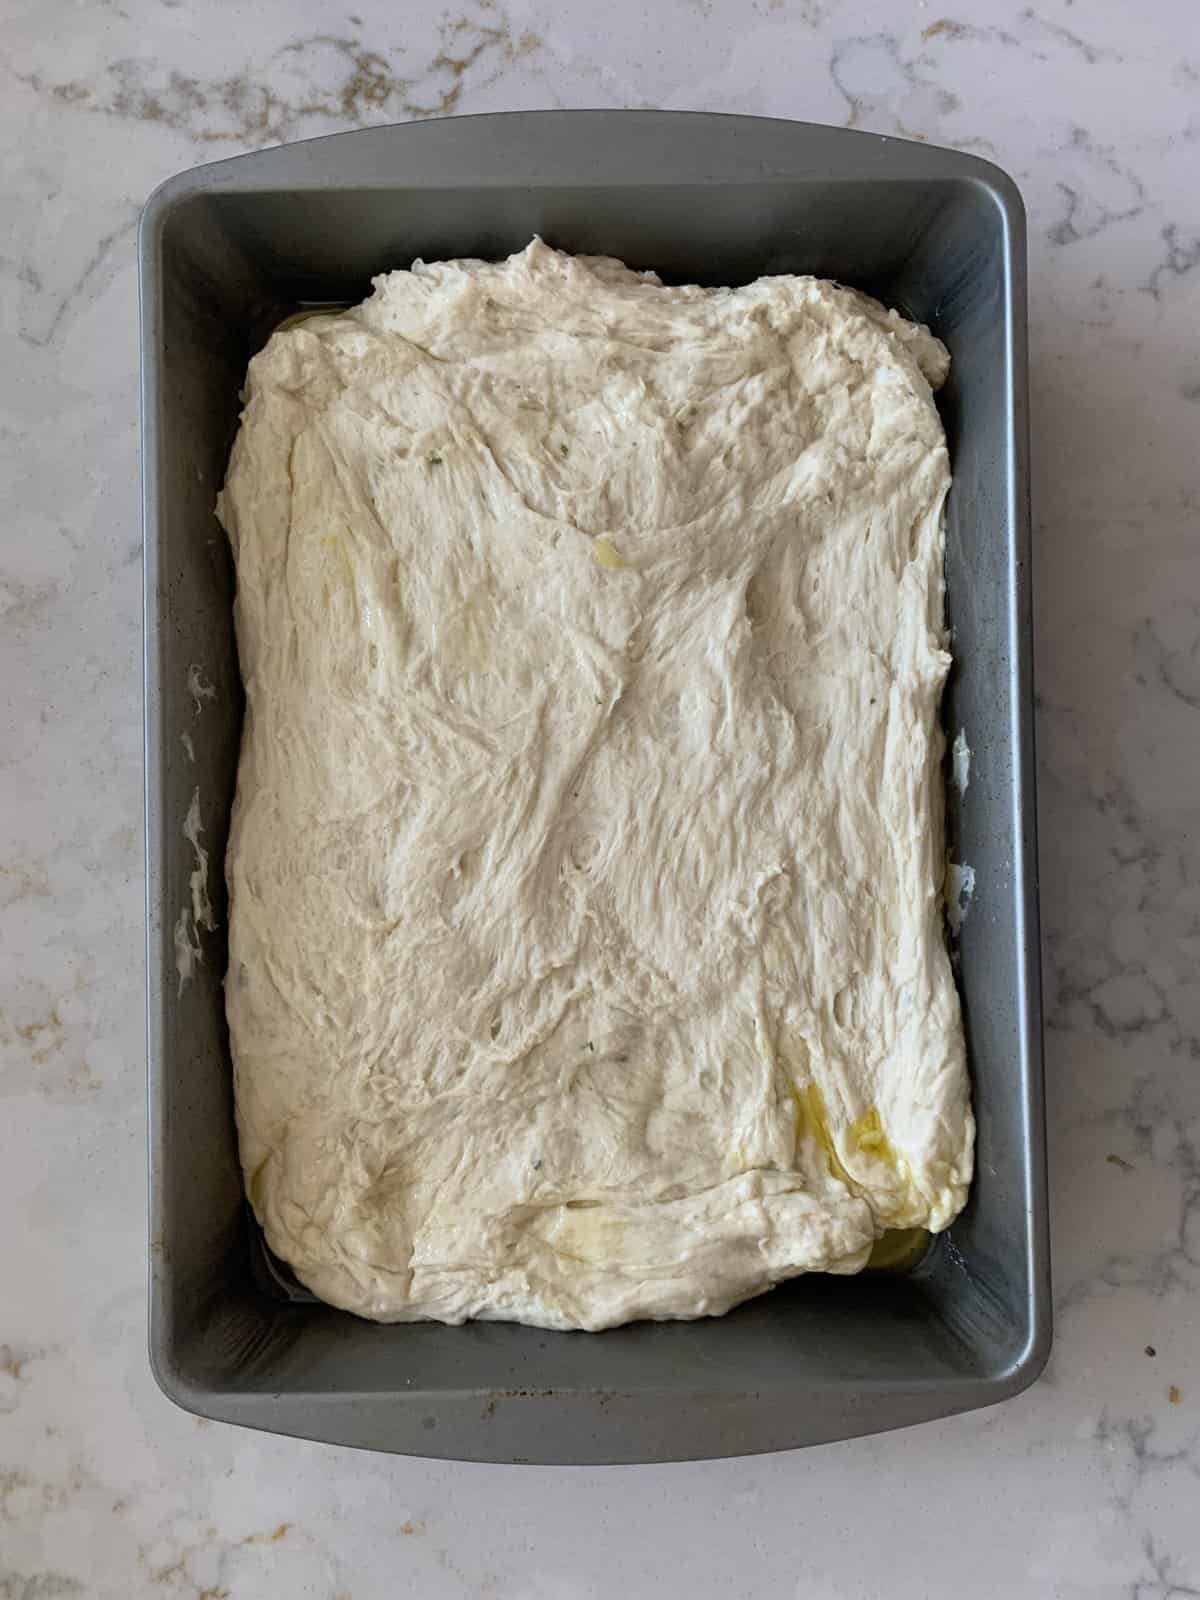 process of formed and shaped Vegan Focaccia dough in baking tray